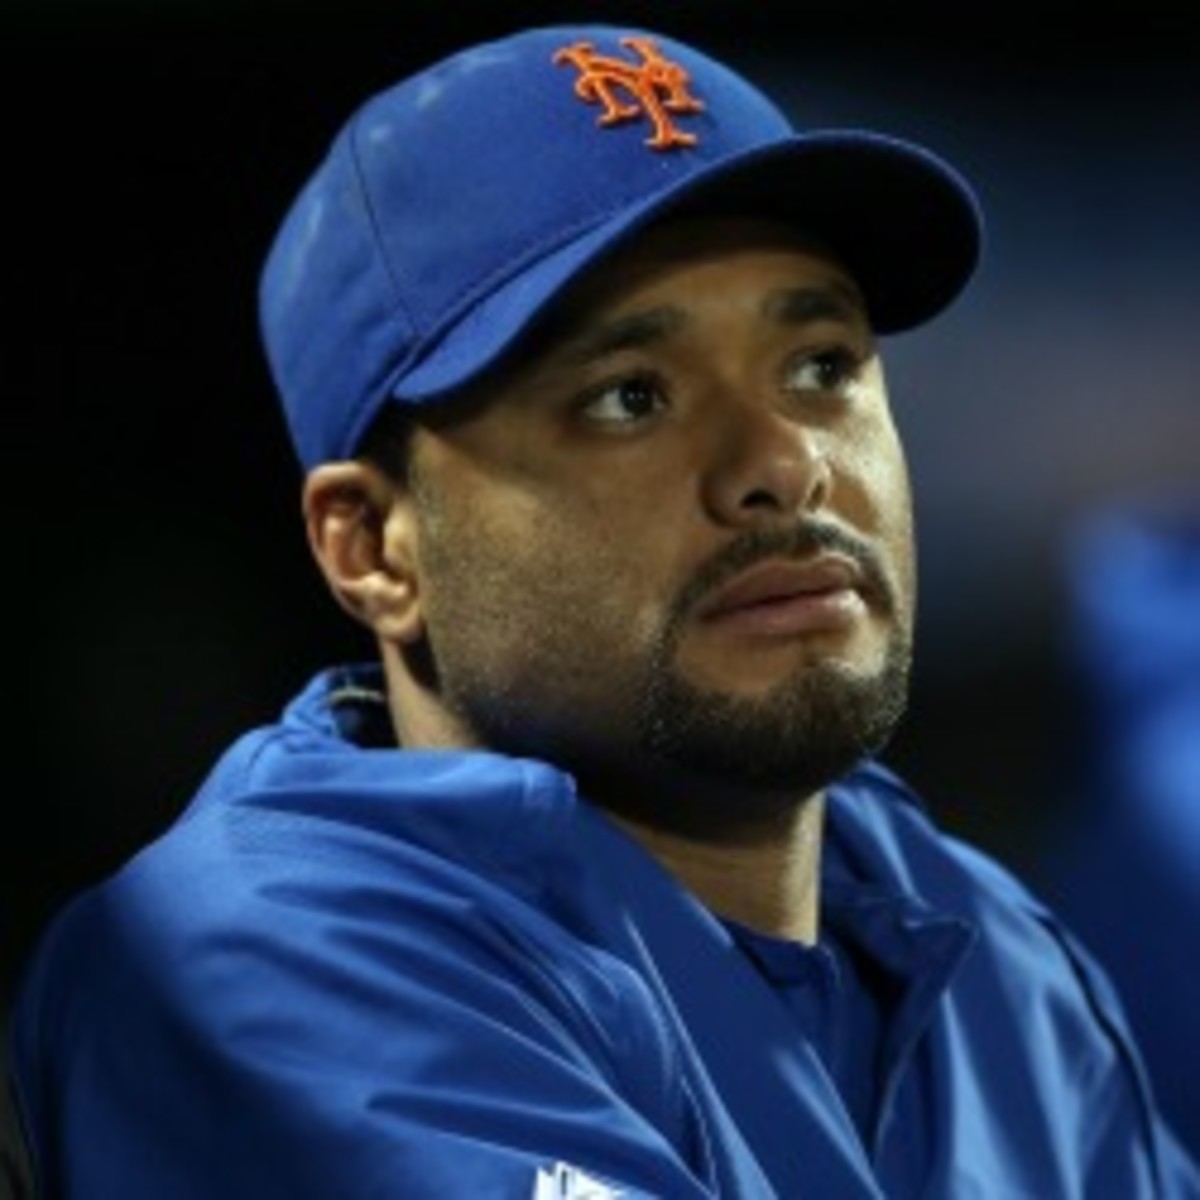 Mets ace Johan Santana showed up to camp out of shape, GM Sandy Alderson told CBSsports.com. (Elsa/Getty Images)